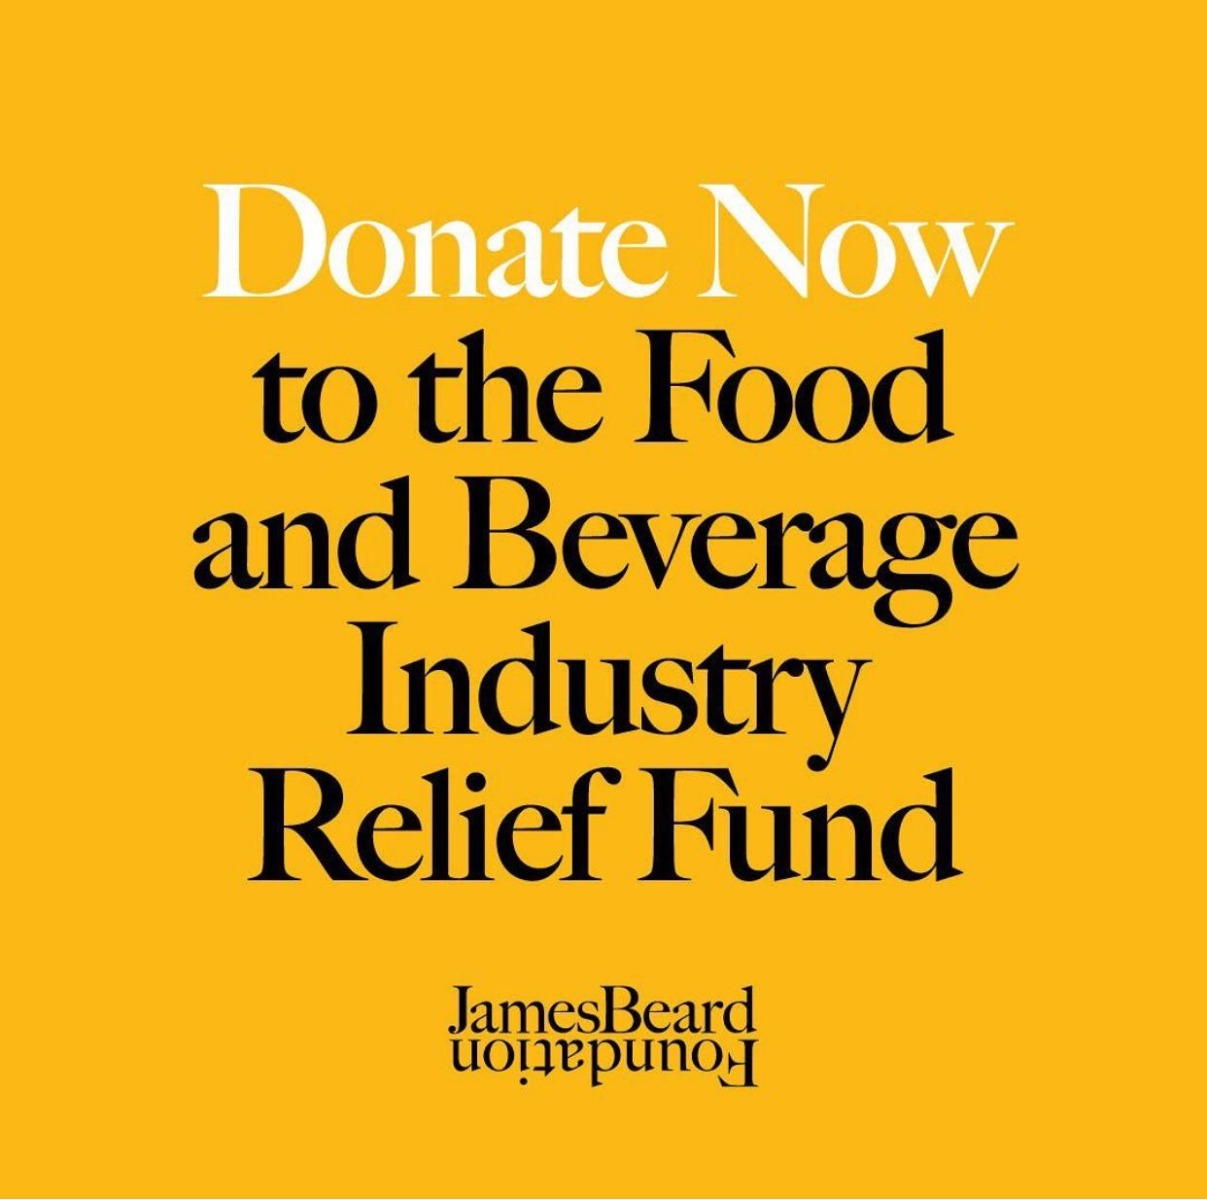 JBF Food and Beverage Industry Relief Fund